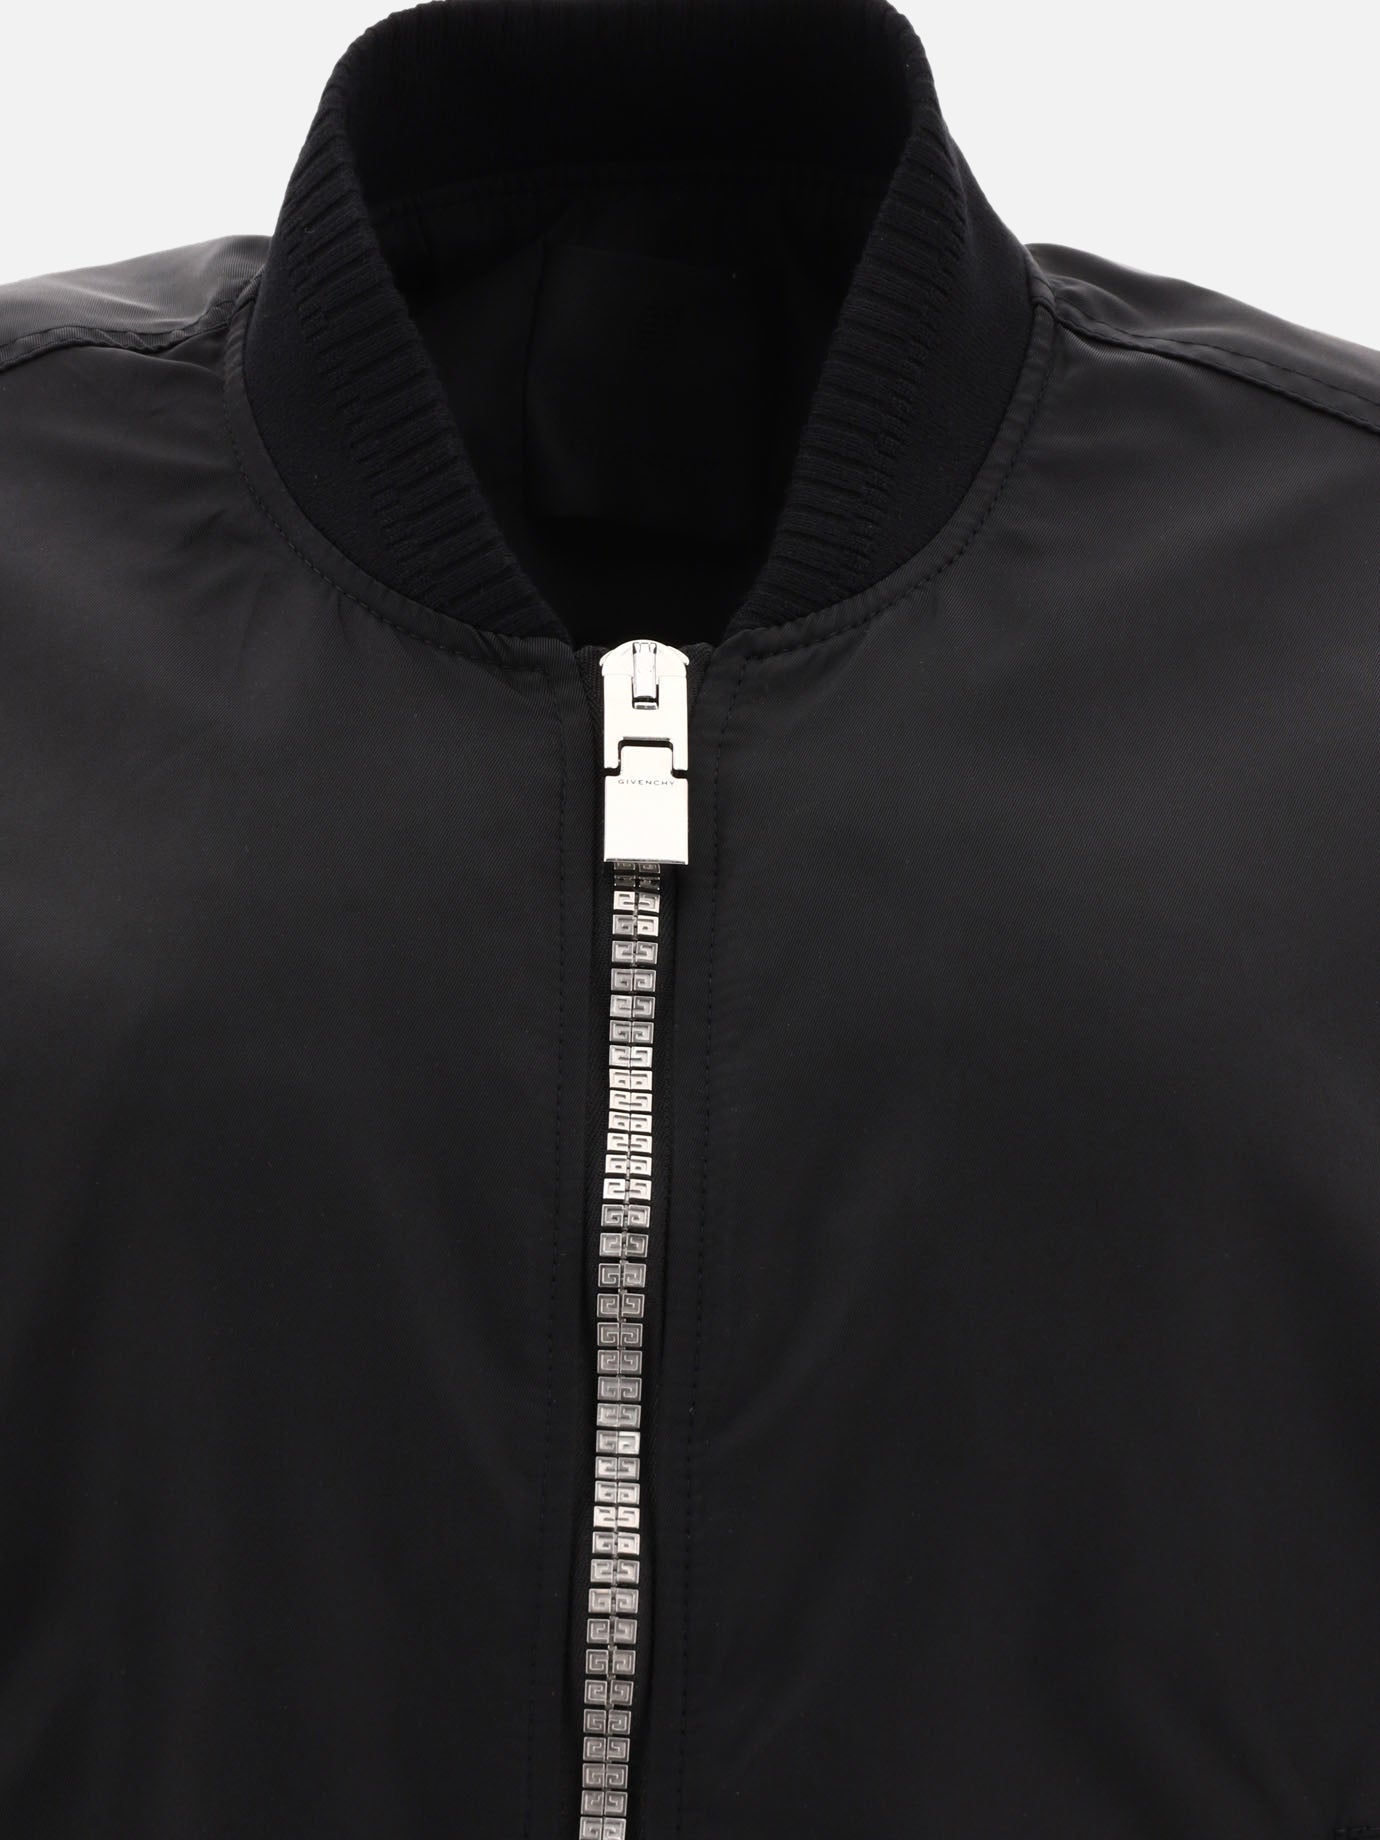 GIVENCHY bomber jacket with pocket detail